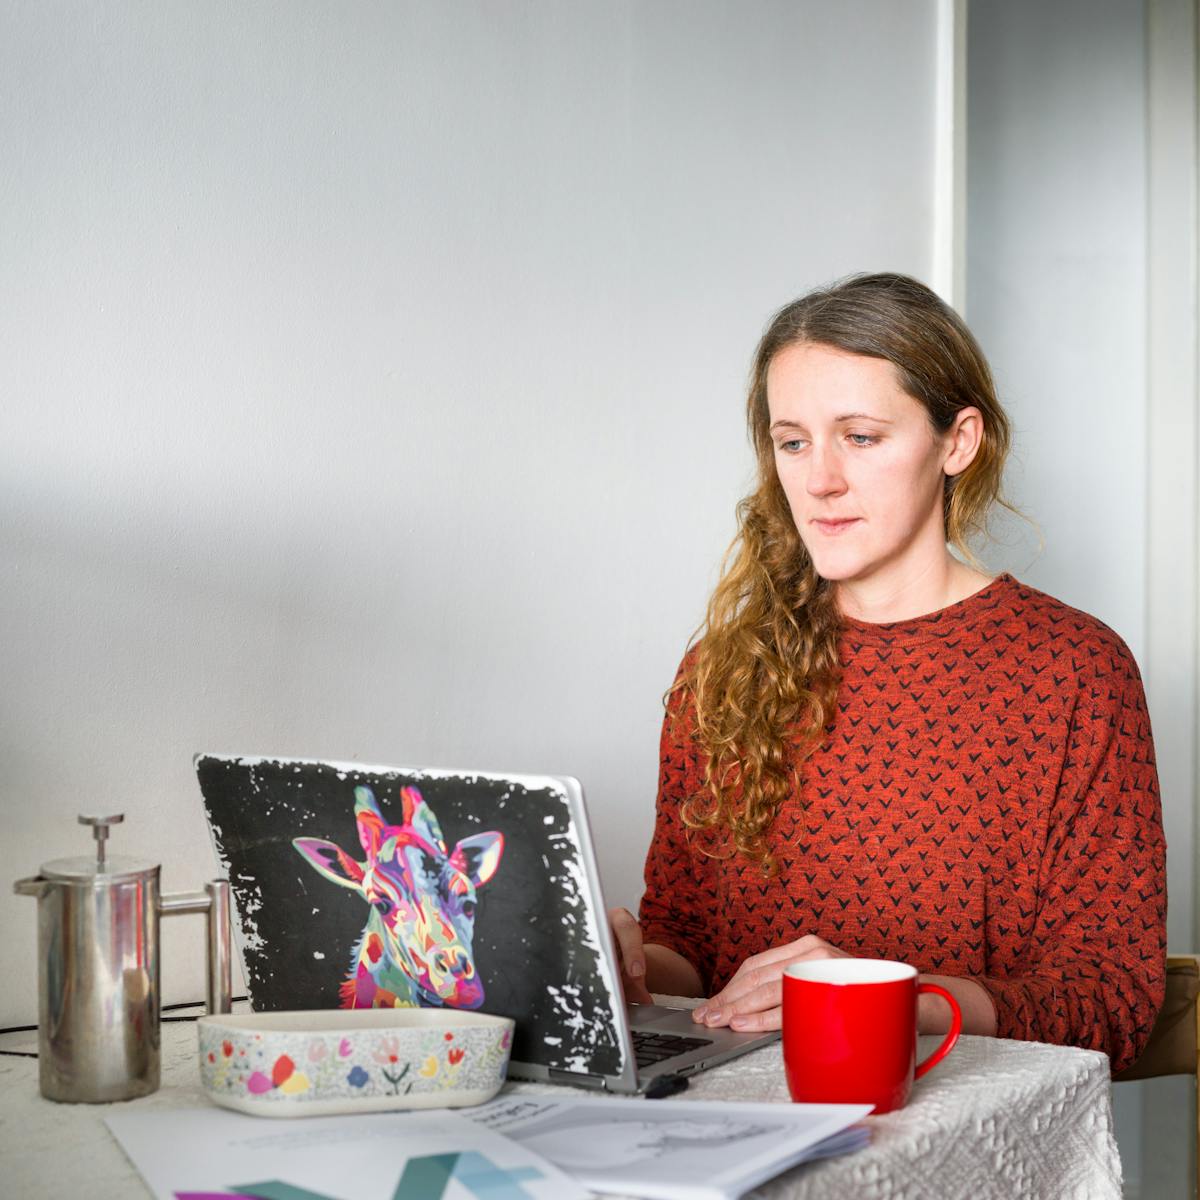 Photographic portrait of a woman sitting at a dinning table against a white wall, in a domestic setting. She is looking down at a laptop screen which is open on the table. Her hands are resting on the keys, in the process of typing. She is wearing a rust coloured top with small black 'v' shapes covering it, which look like birds in flight. Her wavy brown hair is swept over her right shoulder. On the table in front of her is a white fabric tablecloth on which is a red coffee mug, a silver cafetière, a floral dish and printed A4 material. On the lid of her laptop is a colourful drawing of a giraffe's head.